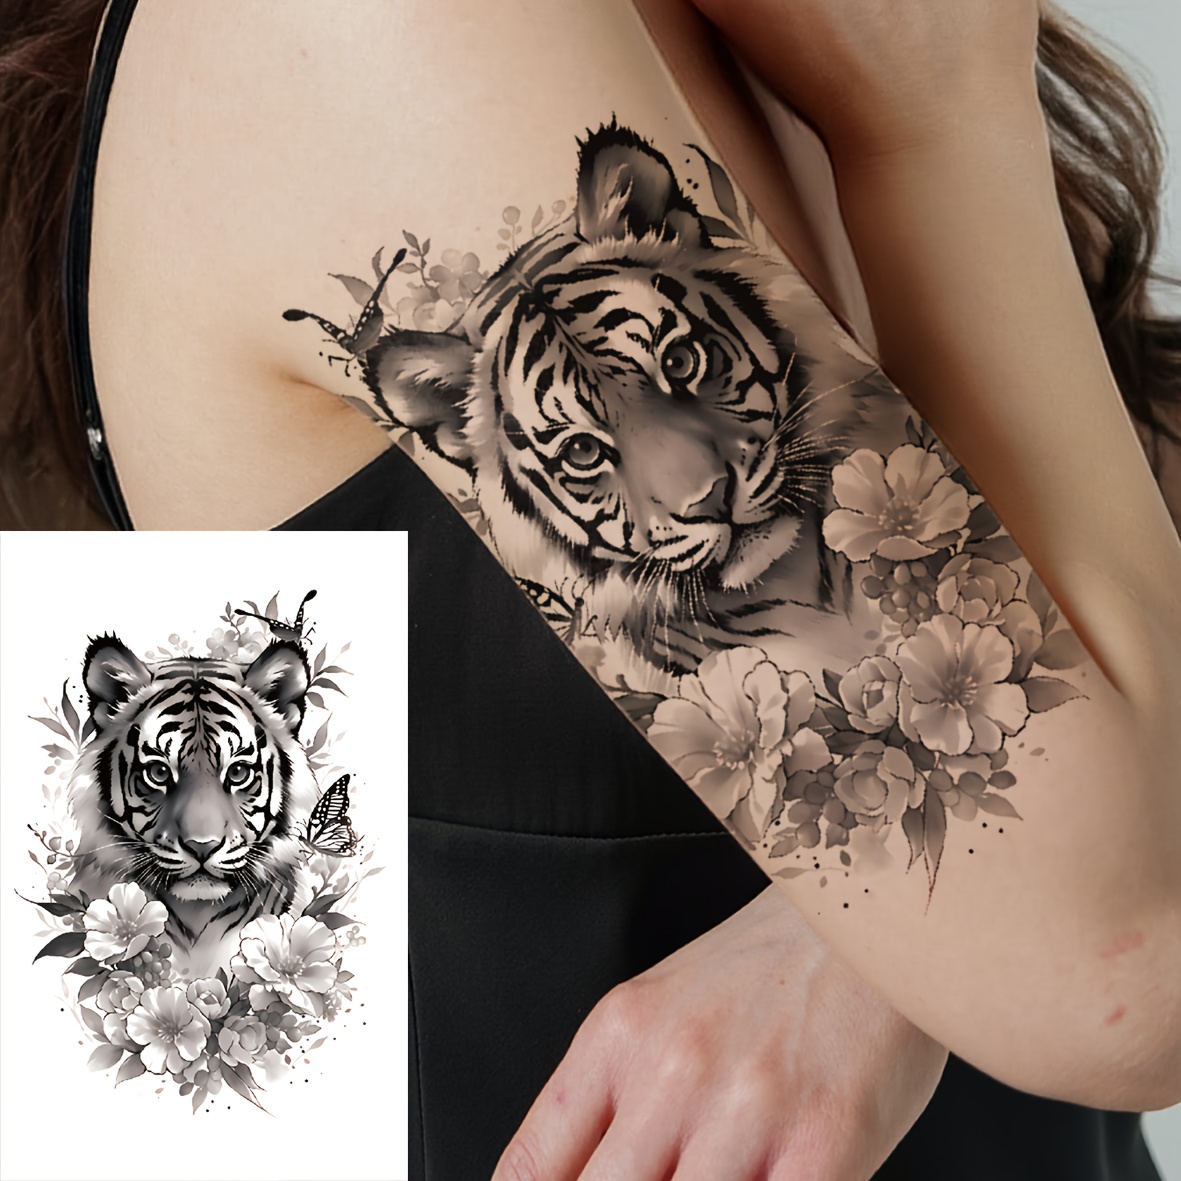 

Temporary Tiger And Flower Tattoo Stickers Waterproof For Boys, Girls, Men, Women - Arm, Forearm, Leg, Chest Use - Party-friendly, Long-lasting Oblong Shape (1 Sheet)